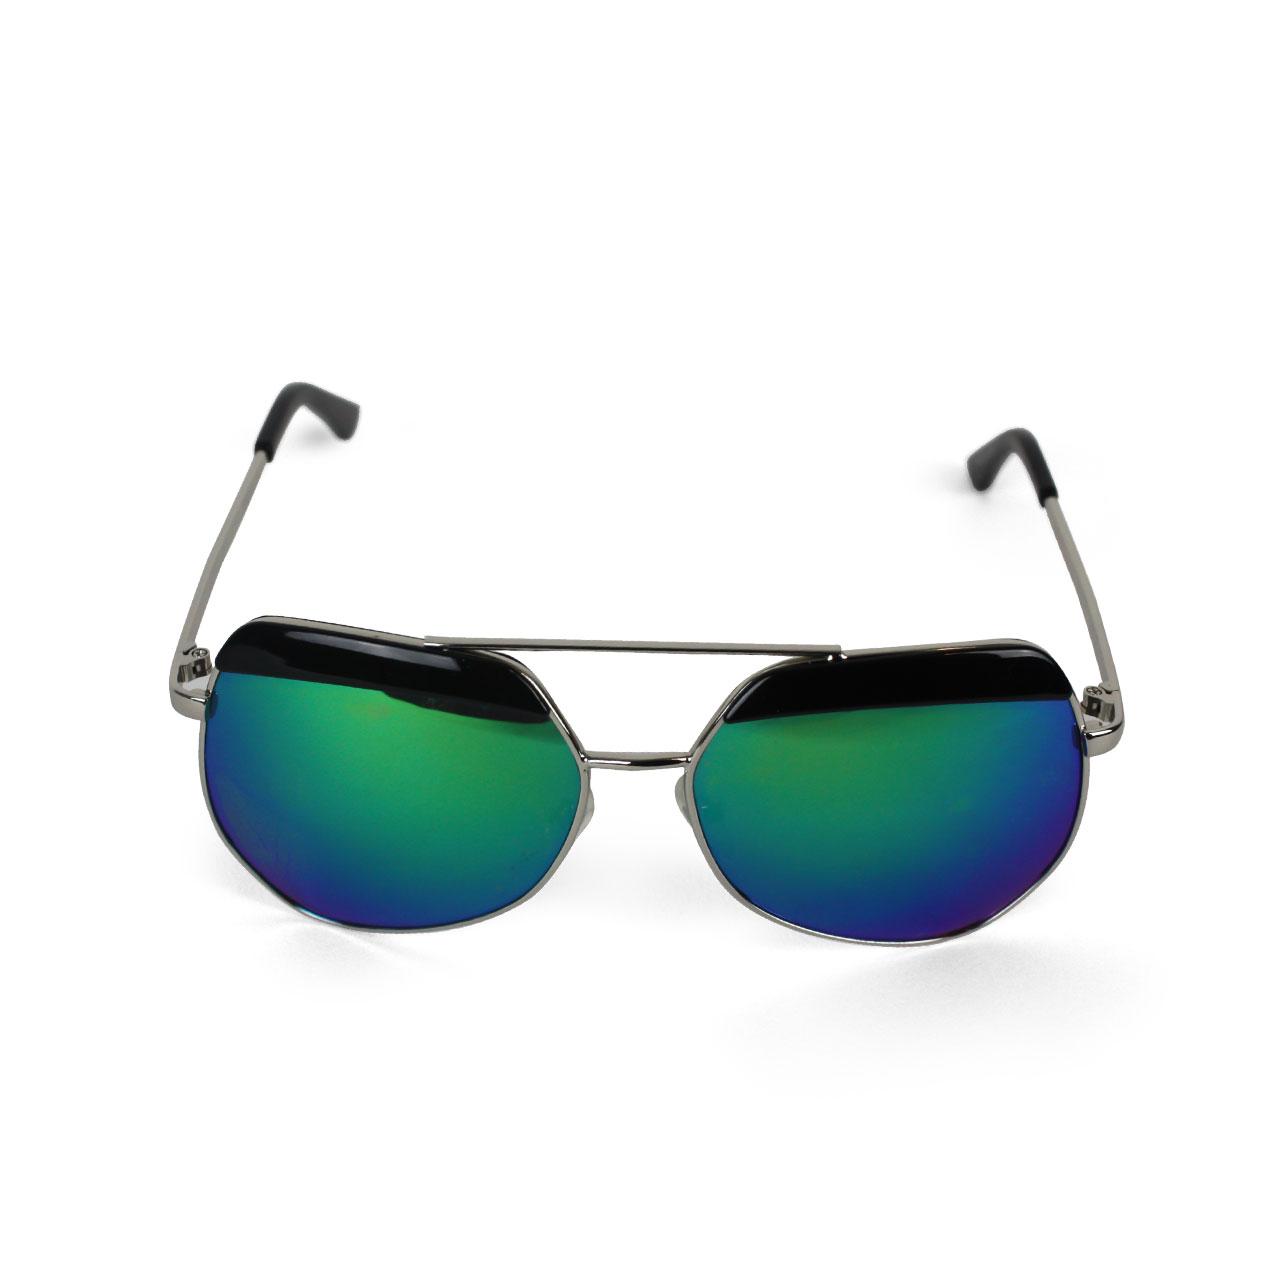 UV Protected Ocean Blue Mirrored Aviator Sunglasses Mens With Silver Metal And Black Frame